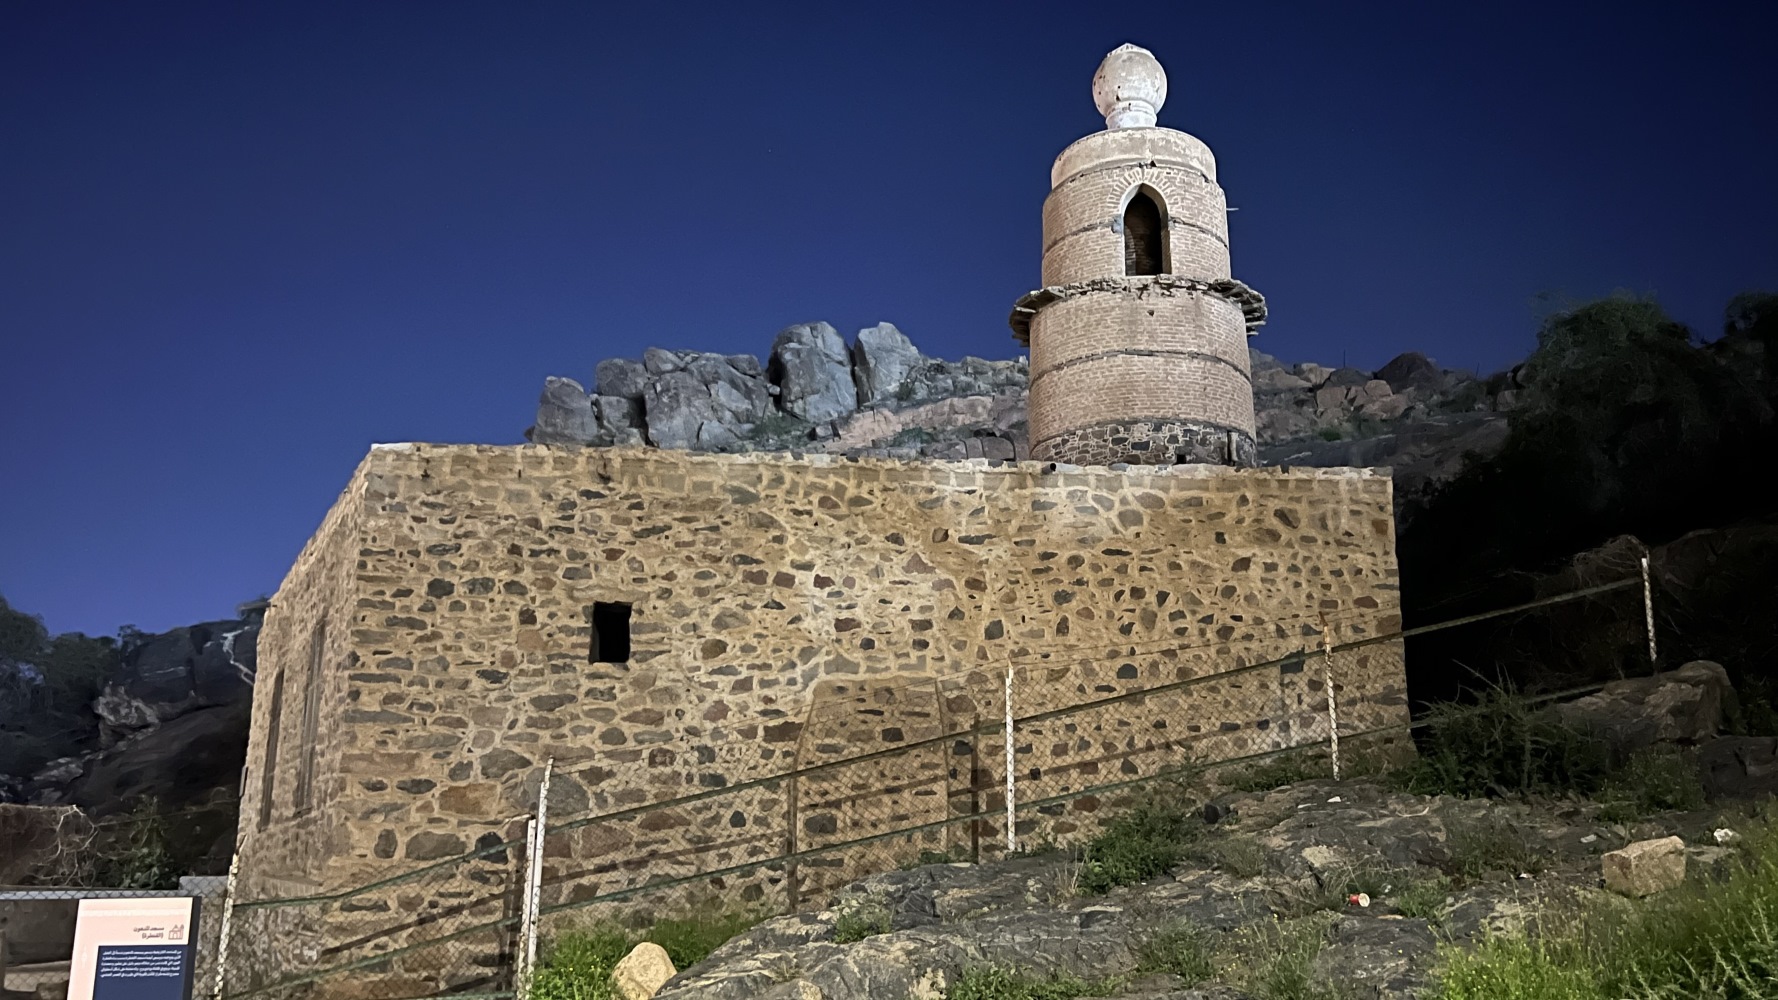 This small mosque in Taif serves as a monument to the Prophet Muhammad's visit to the city (MEE/Zirrar Ali)